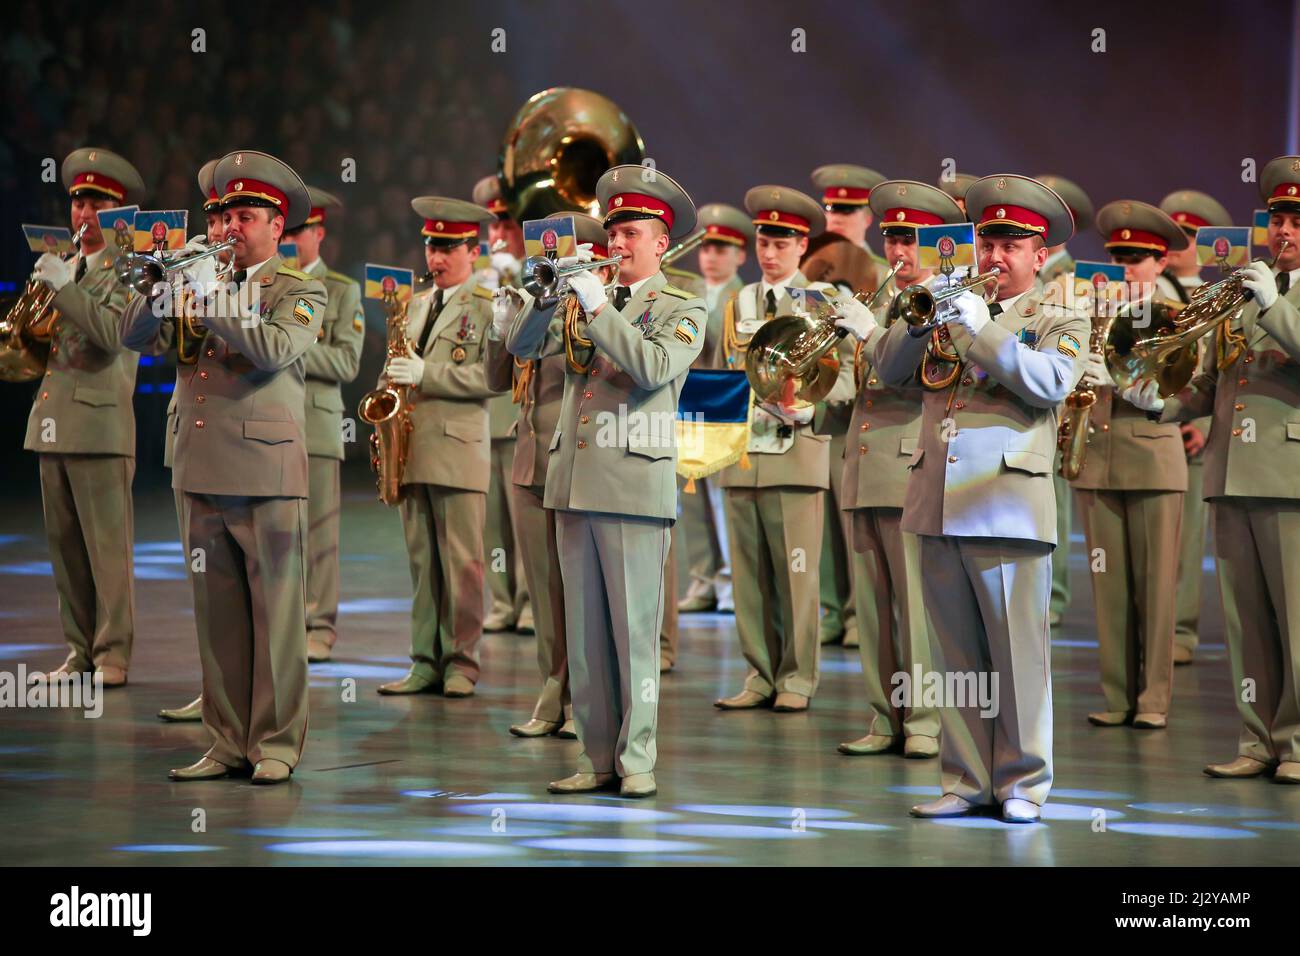 Military Band of the Ukrainian Ground Forces, short: Military Band Chernihiv, Ukraine, at Musikparade 2017, Marching Band Show at Rittal-Arena Wetzlar, Germany, 12th Mar, 2017. Stock Photo